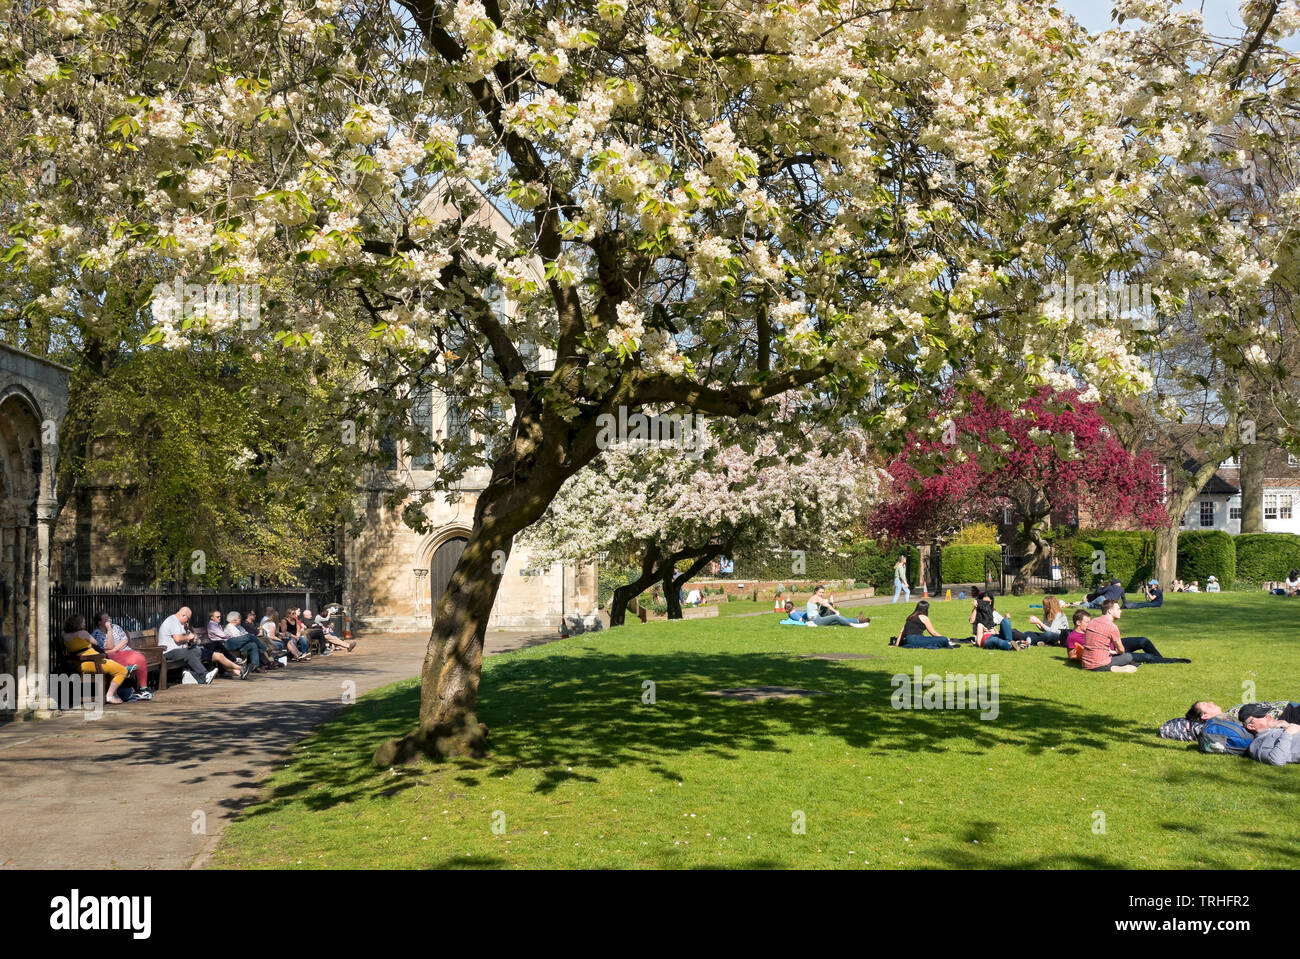 People enjoying relaxing in the spring sunshine in Deans Park York North Yorkshire England UK United Kingdom GB Great Britain Stock Photo